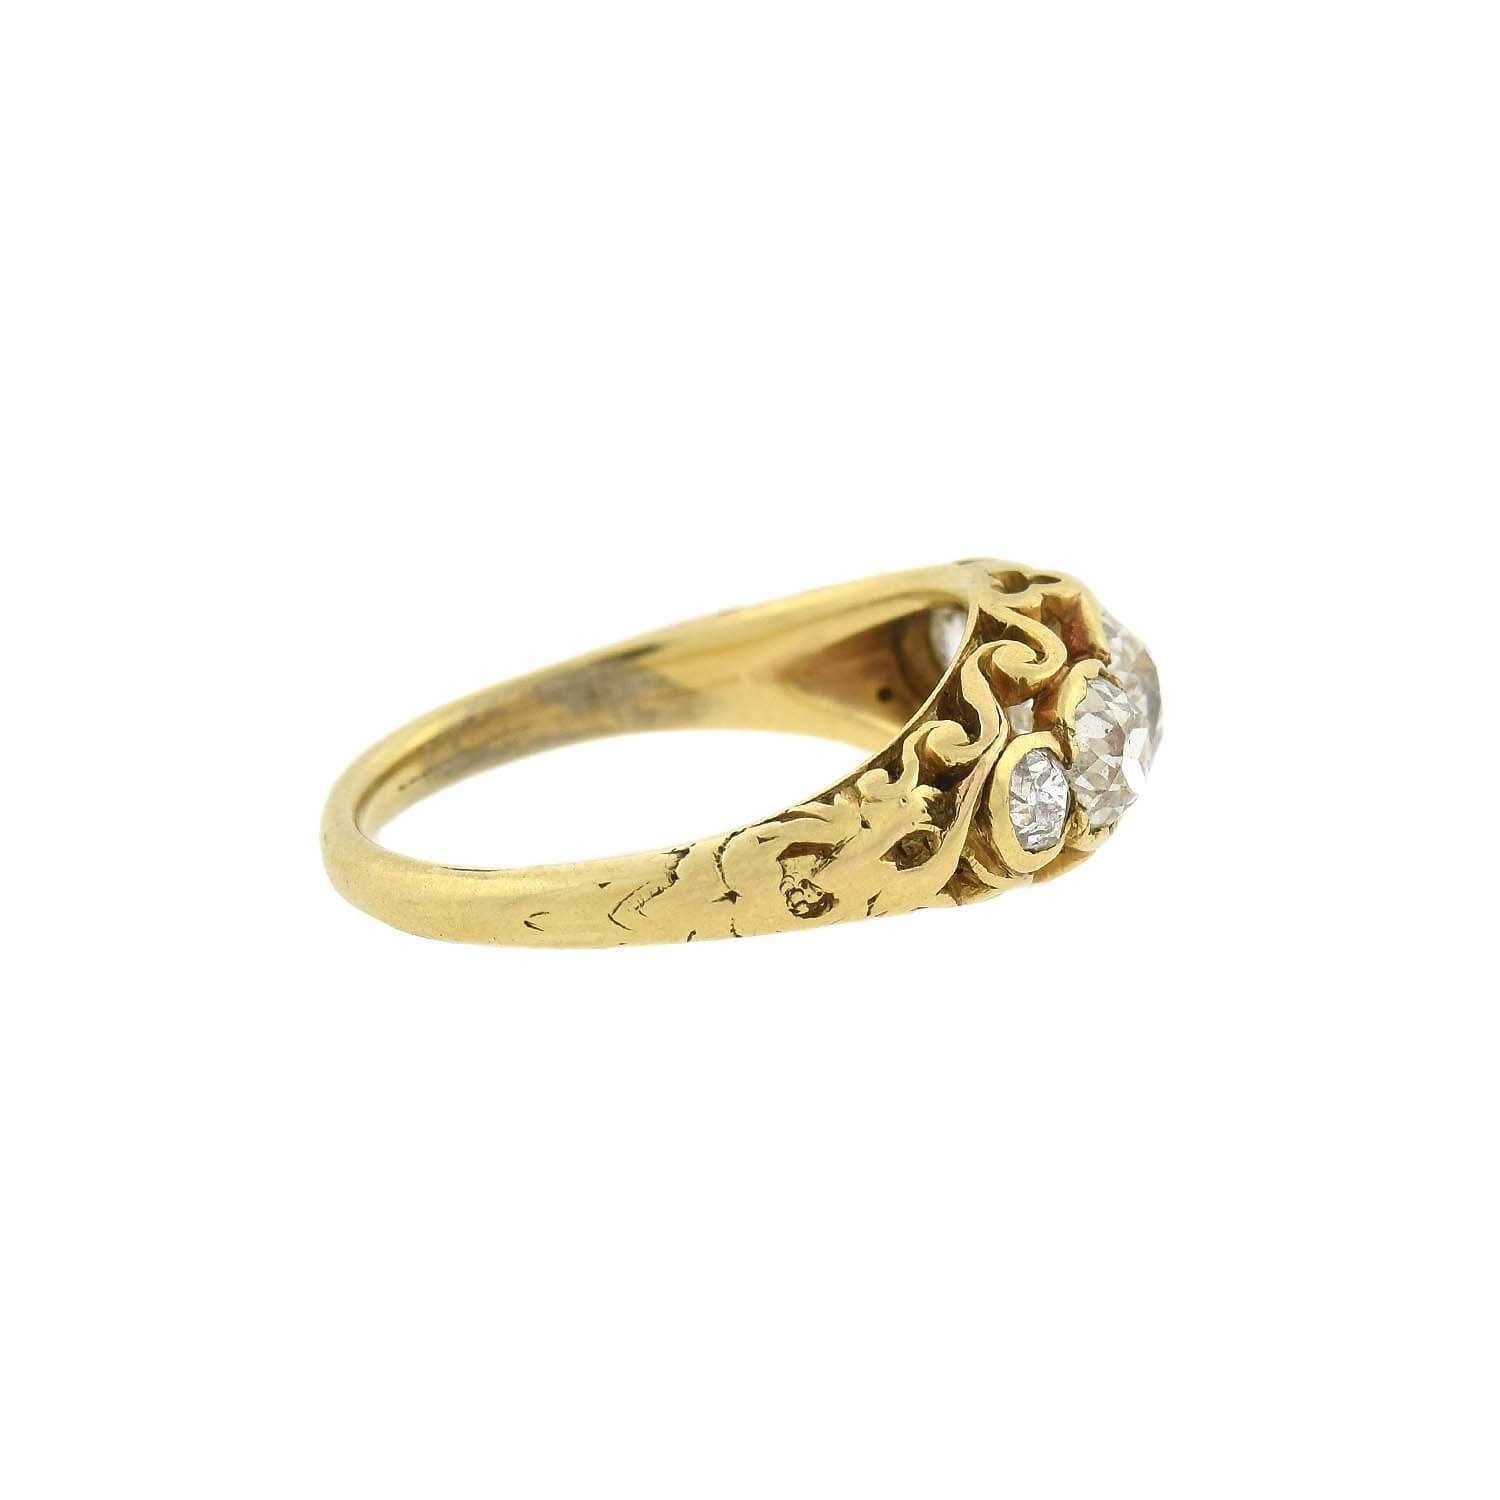 A gorgeous Victorian (ca1880s) era diamond ring! Crafted in 18kt yellow gold, this stunning piece has a beautiful graduated 5-stone design. An 0.95ct Old Mine Cut Cushion rests at the center of the ring, flanked by two Old Mine Cut diamonds on each